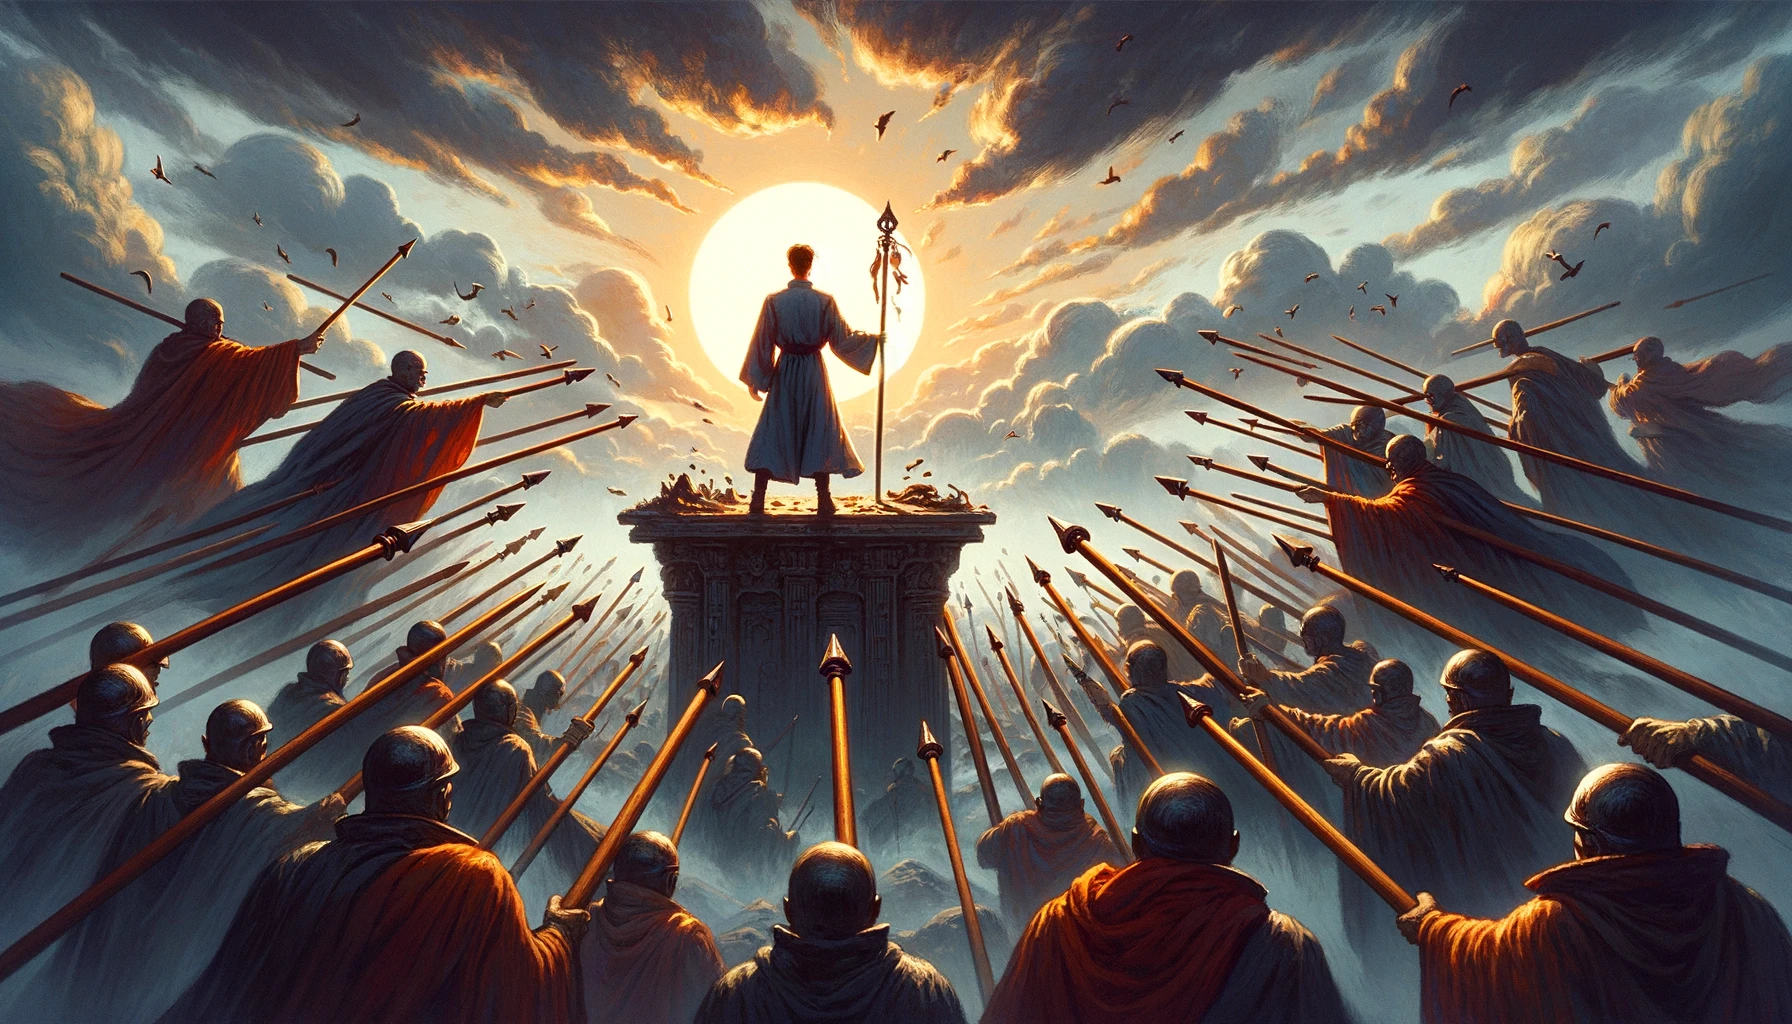 An image depicts an individual standing tall amidst swirling clouds of tension, their expression resolute and determined. The background is charged with a sense of purpose and resolve, symbolizing the challenges they face. The person's unwavering spirit is evident as they stand firm in defense of their beliefs, radiating passion, energy, and courage.